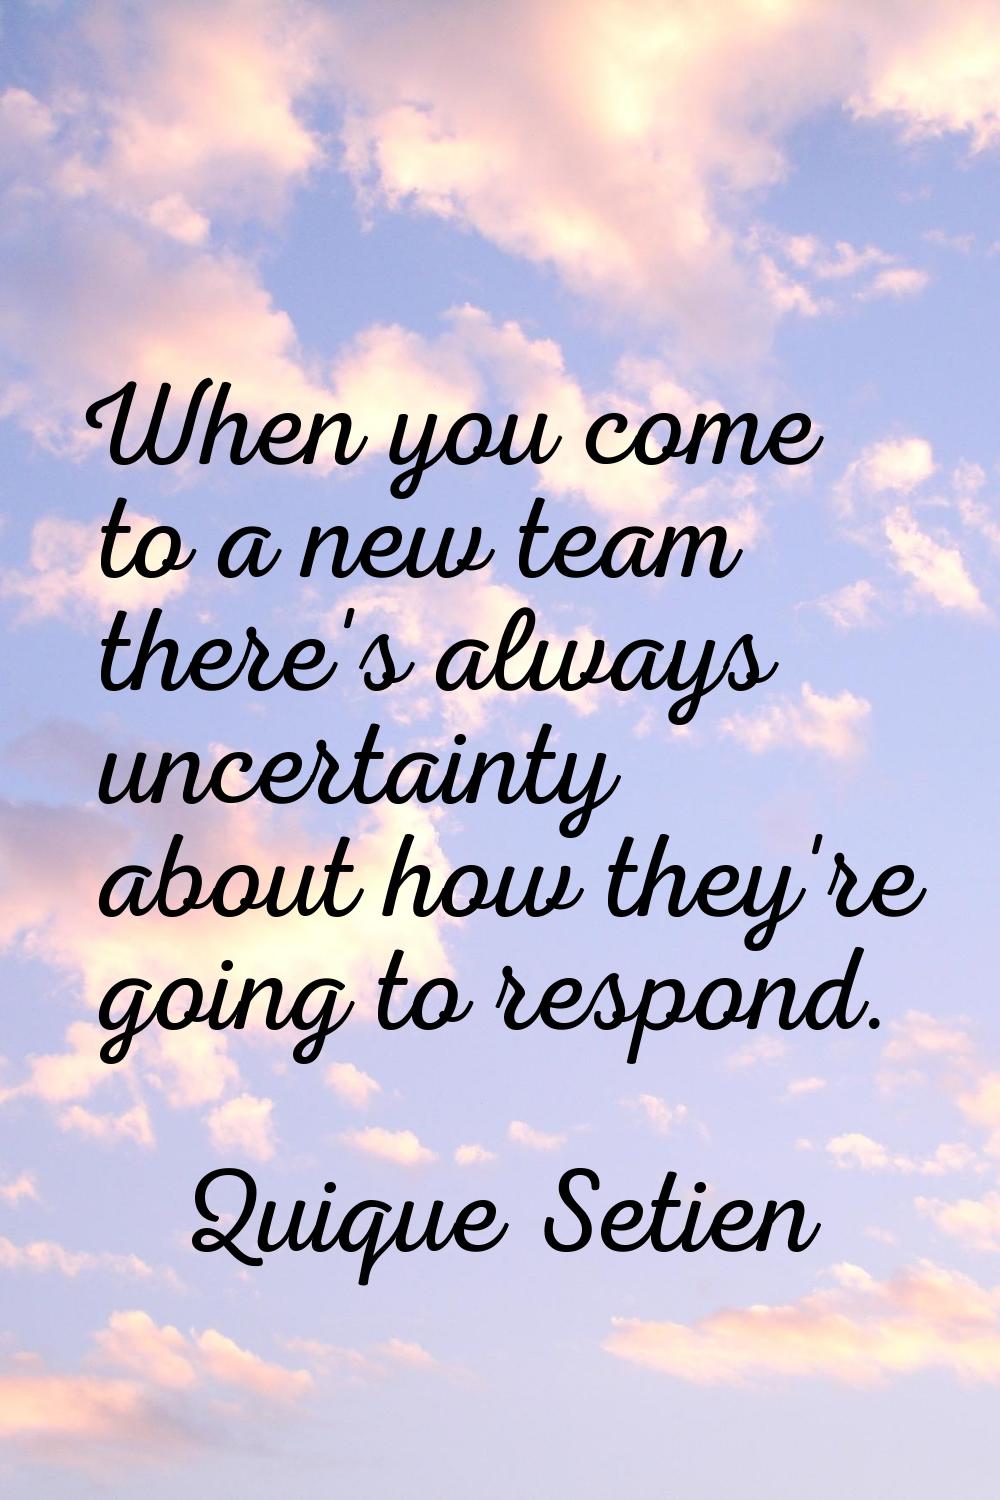 When you come to a new team there's always uncertainty about how they're going to respond.